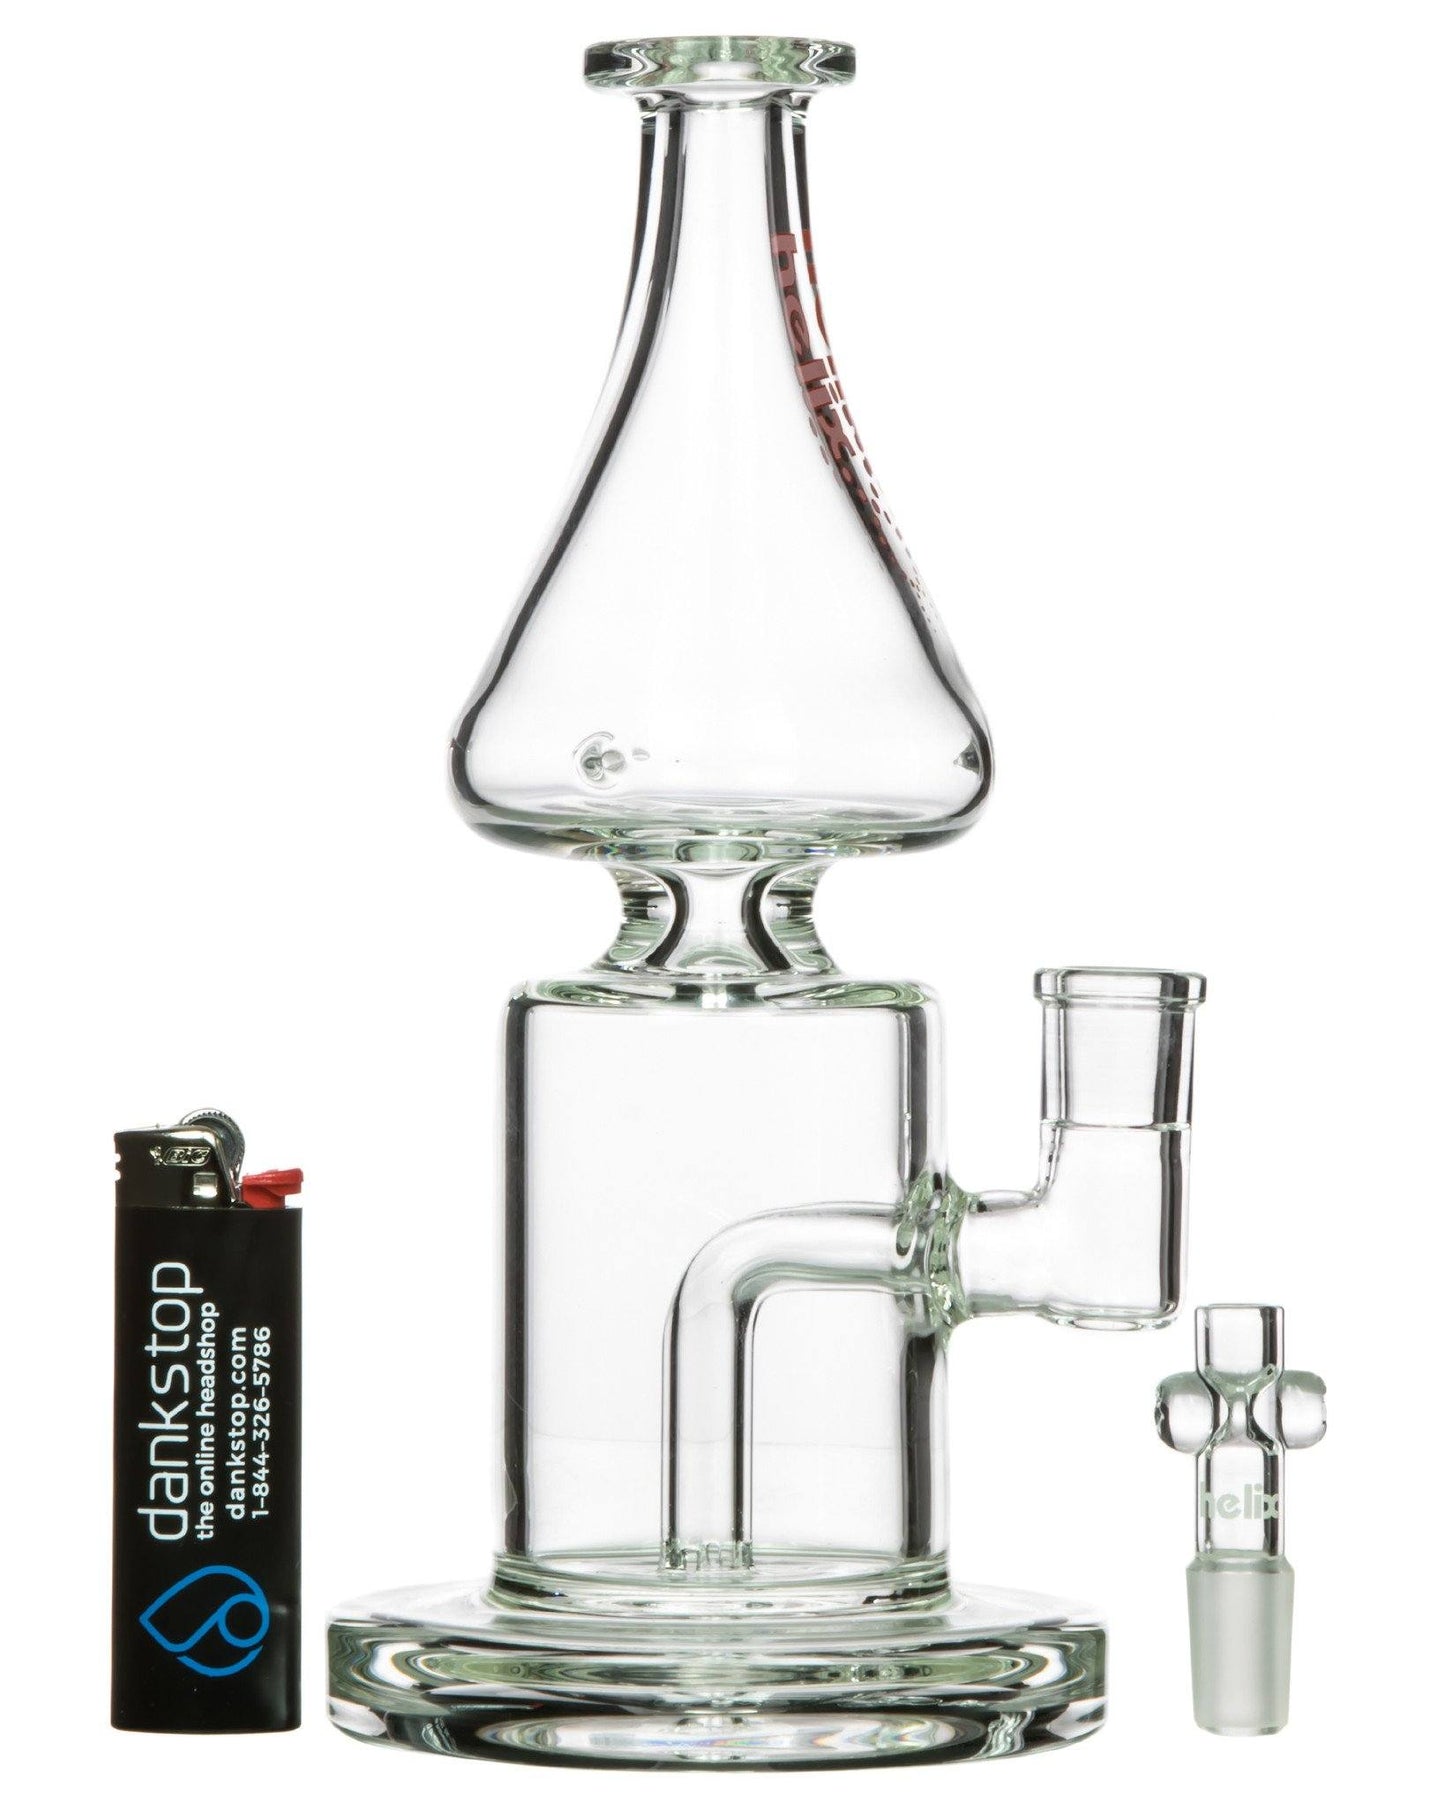 helix bong by grav labs at Flower Power Packages